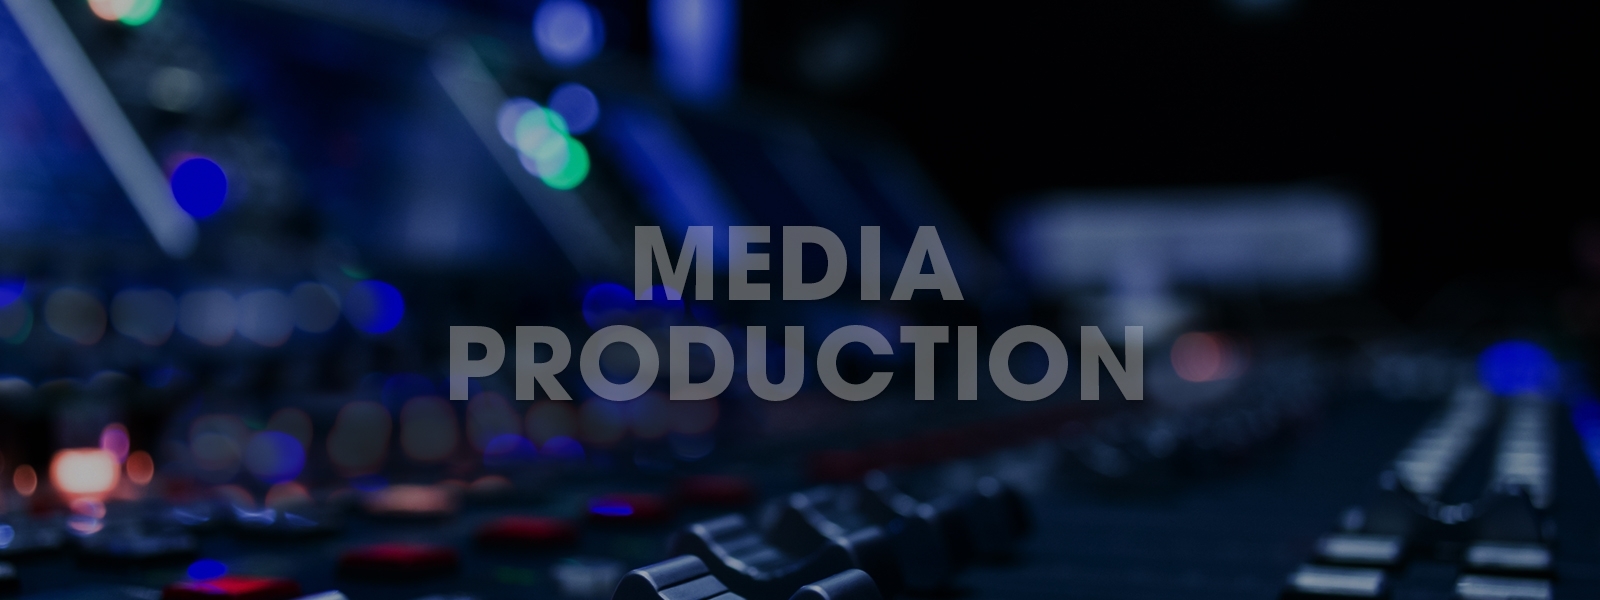 2_MEDIAPRODUCTION_1600x600